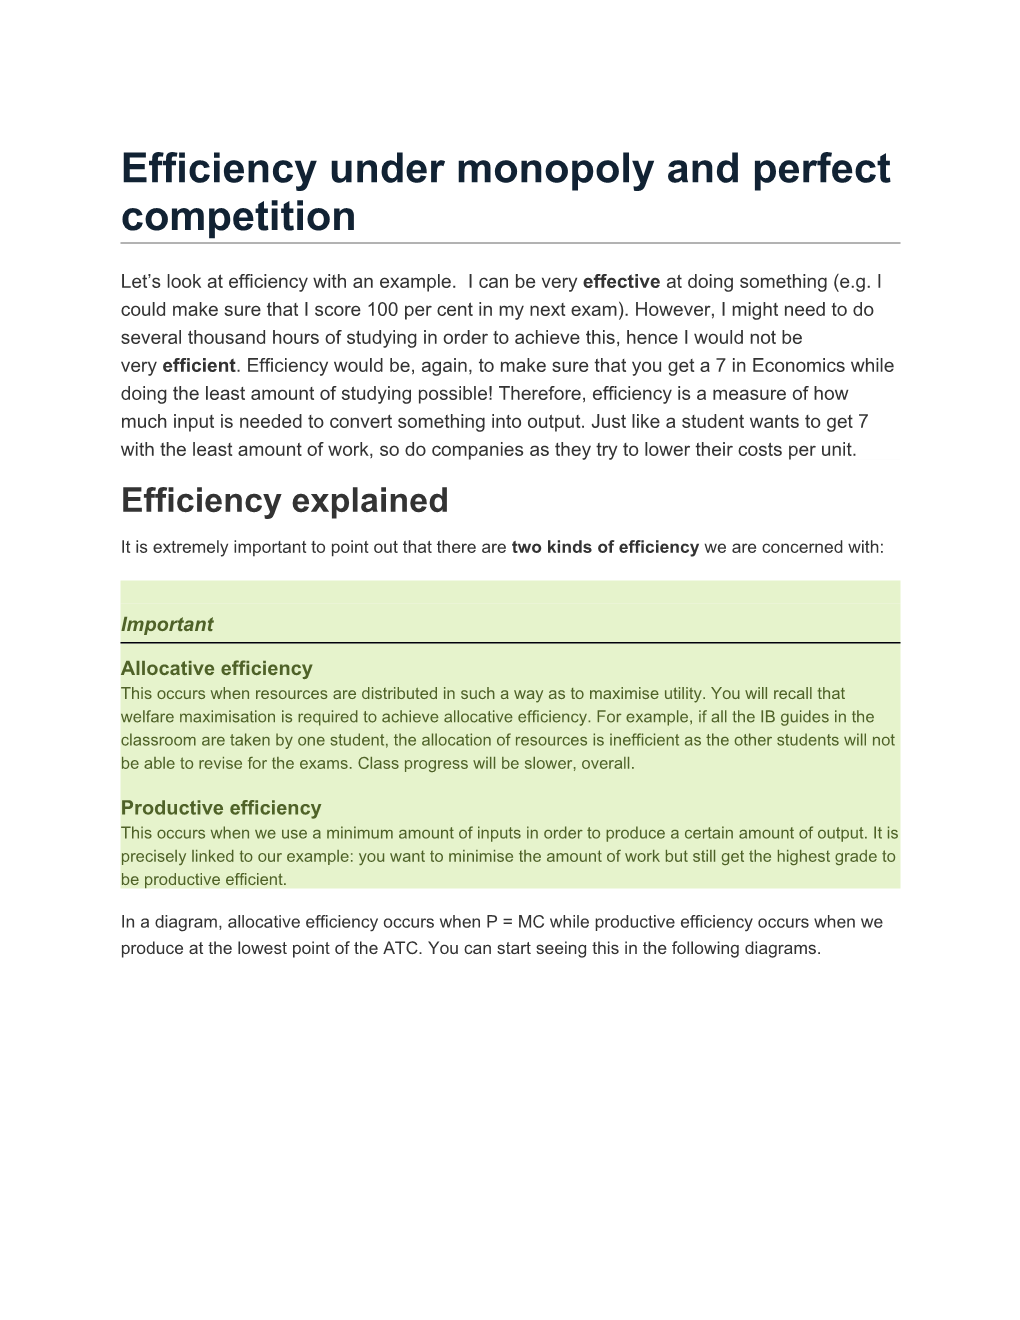 Efficiency Under Monopoly and Perfect Competition